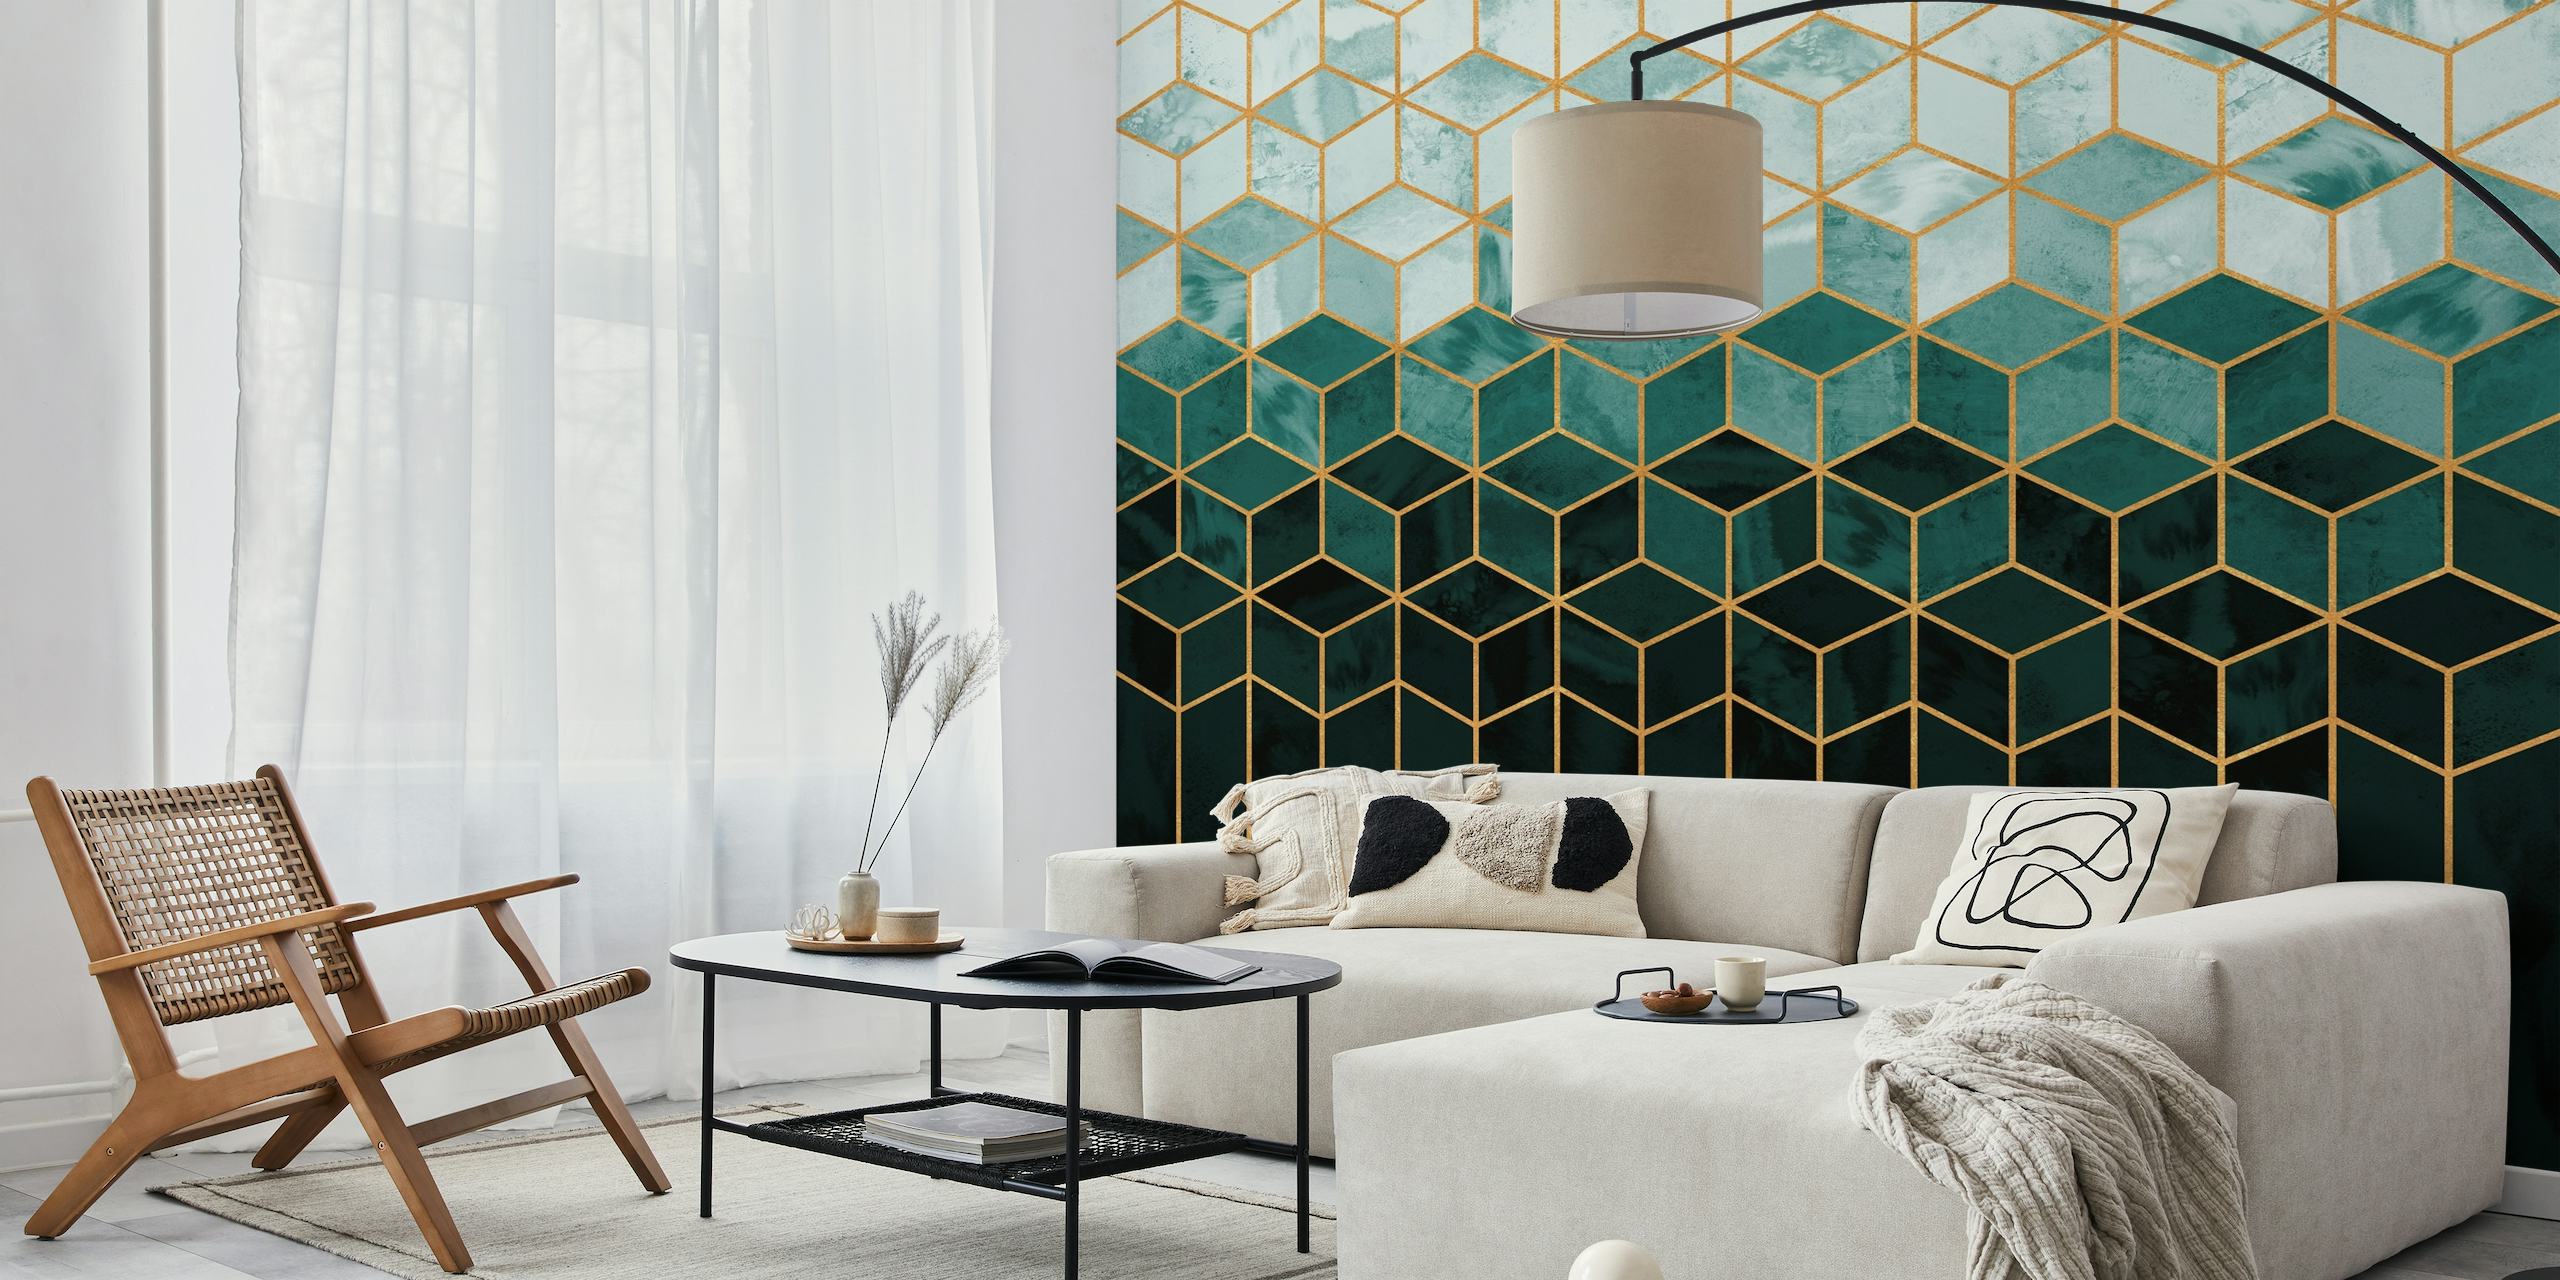 Teal and gold geometric cubes pattern wall mural